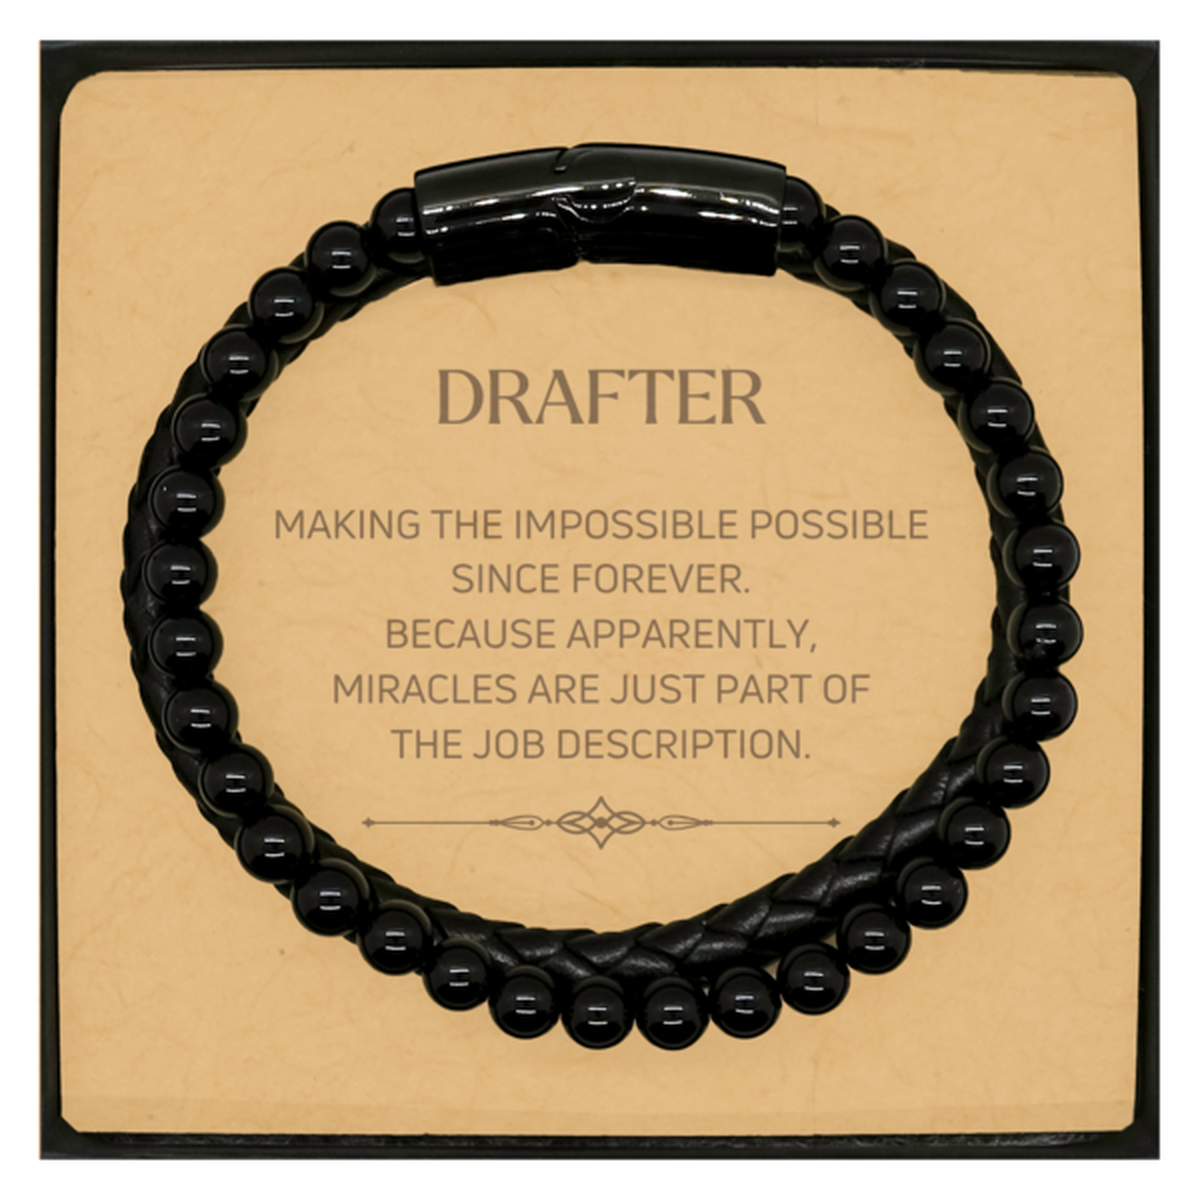 Funny Drafter Gifts, Miracles are just part of the job description, Inspirational Birthday Christmas Stone Leather Bracelets For Drafter, Men, Women, Coworkers, Friends, Boss